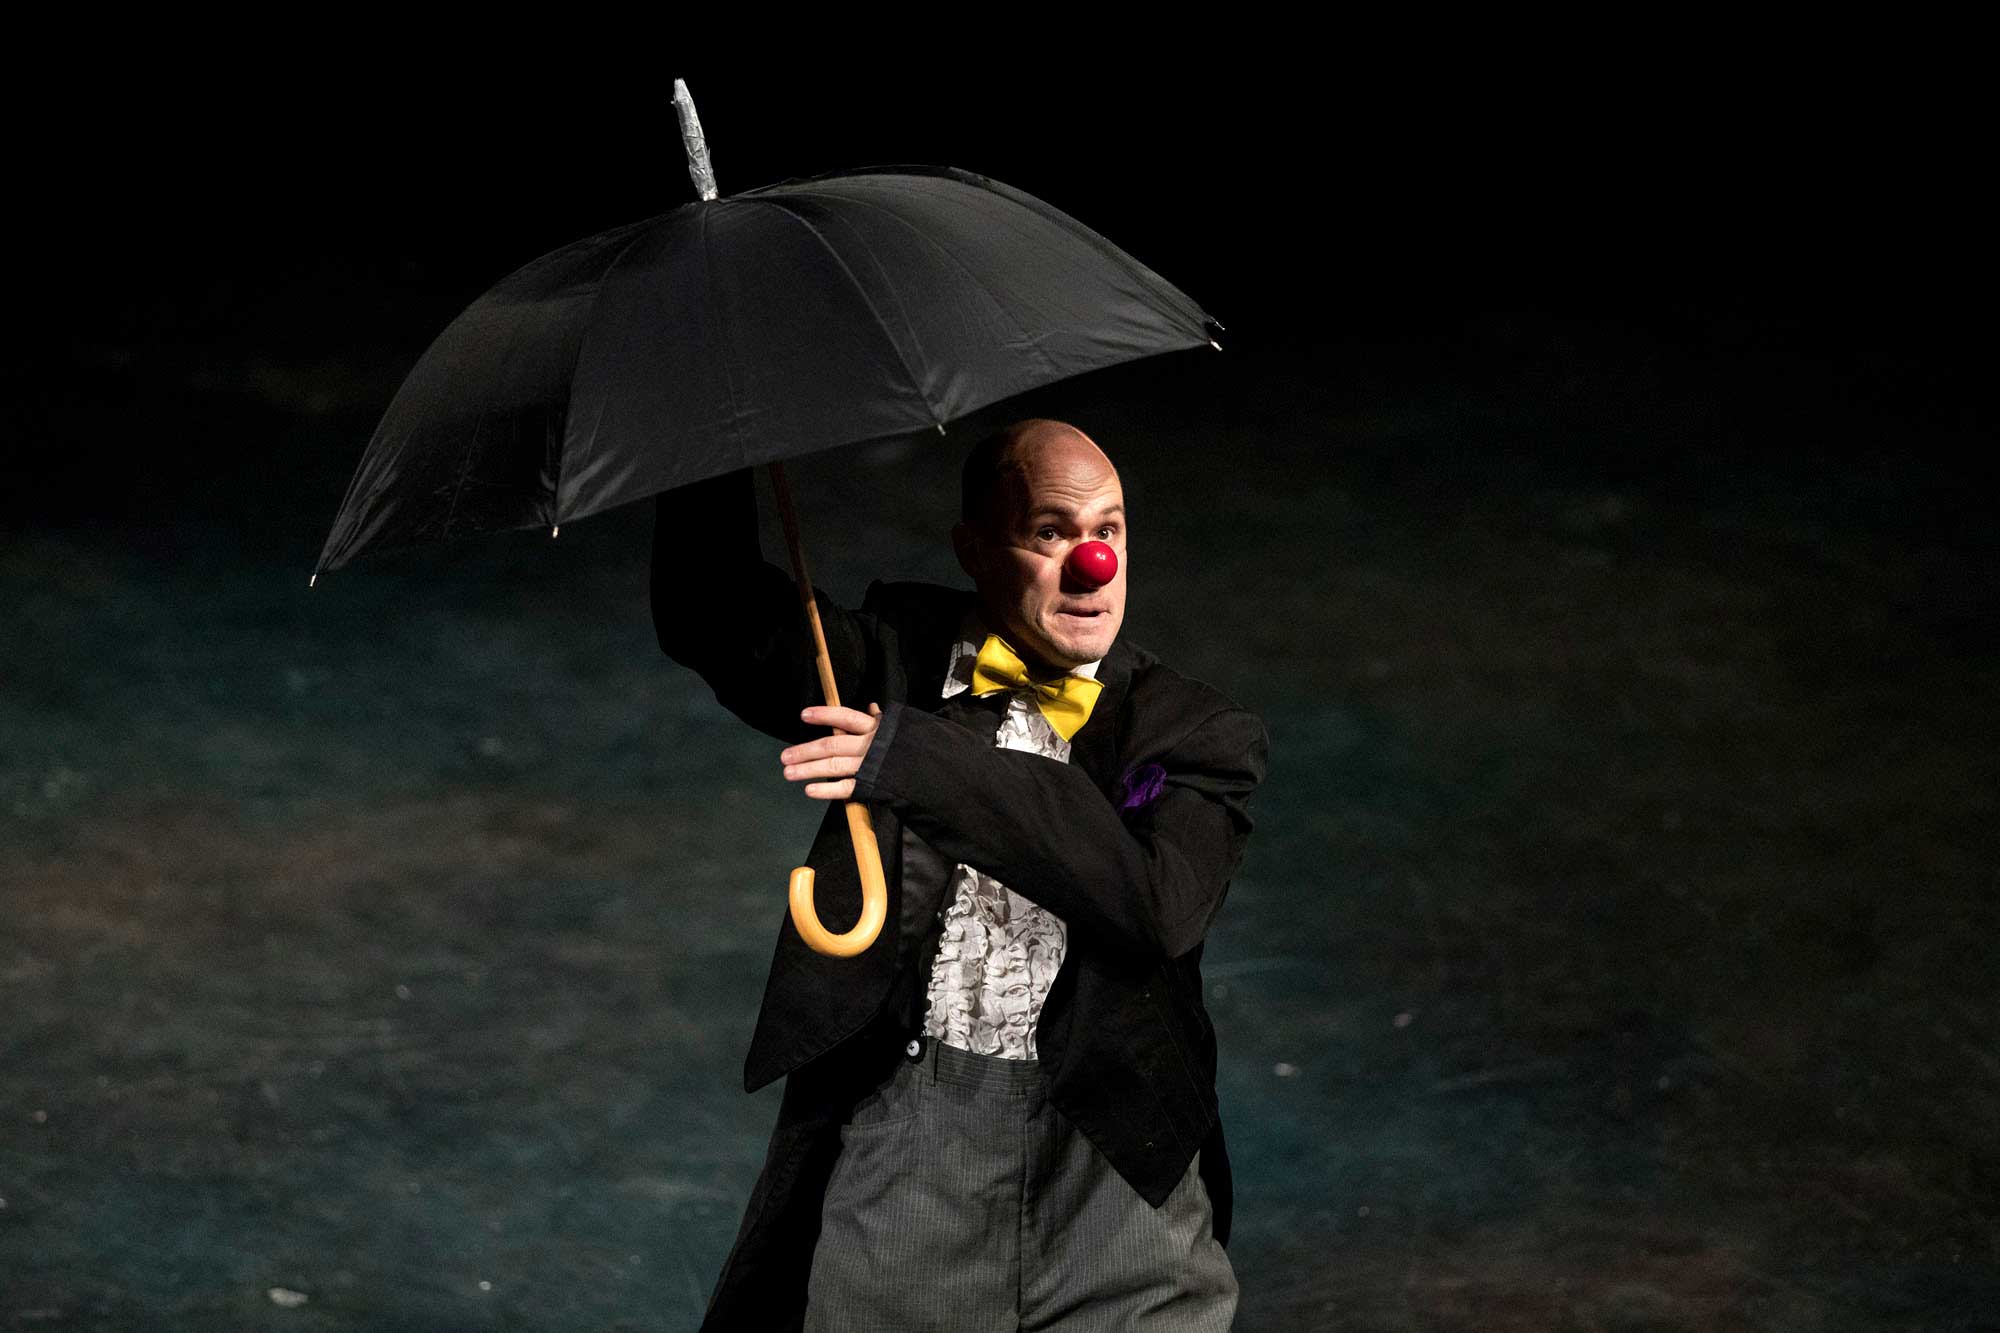 Cunningham has worked as a performer with Clowns Without Borders and served as the organization’s executive director. He now sits on the nonprofit’s board of directors. 